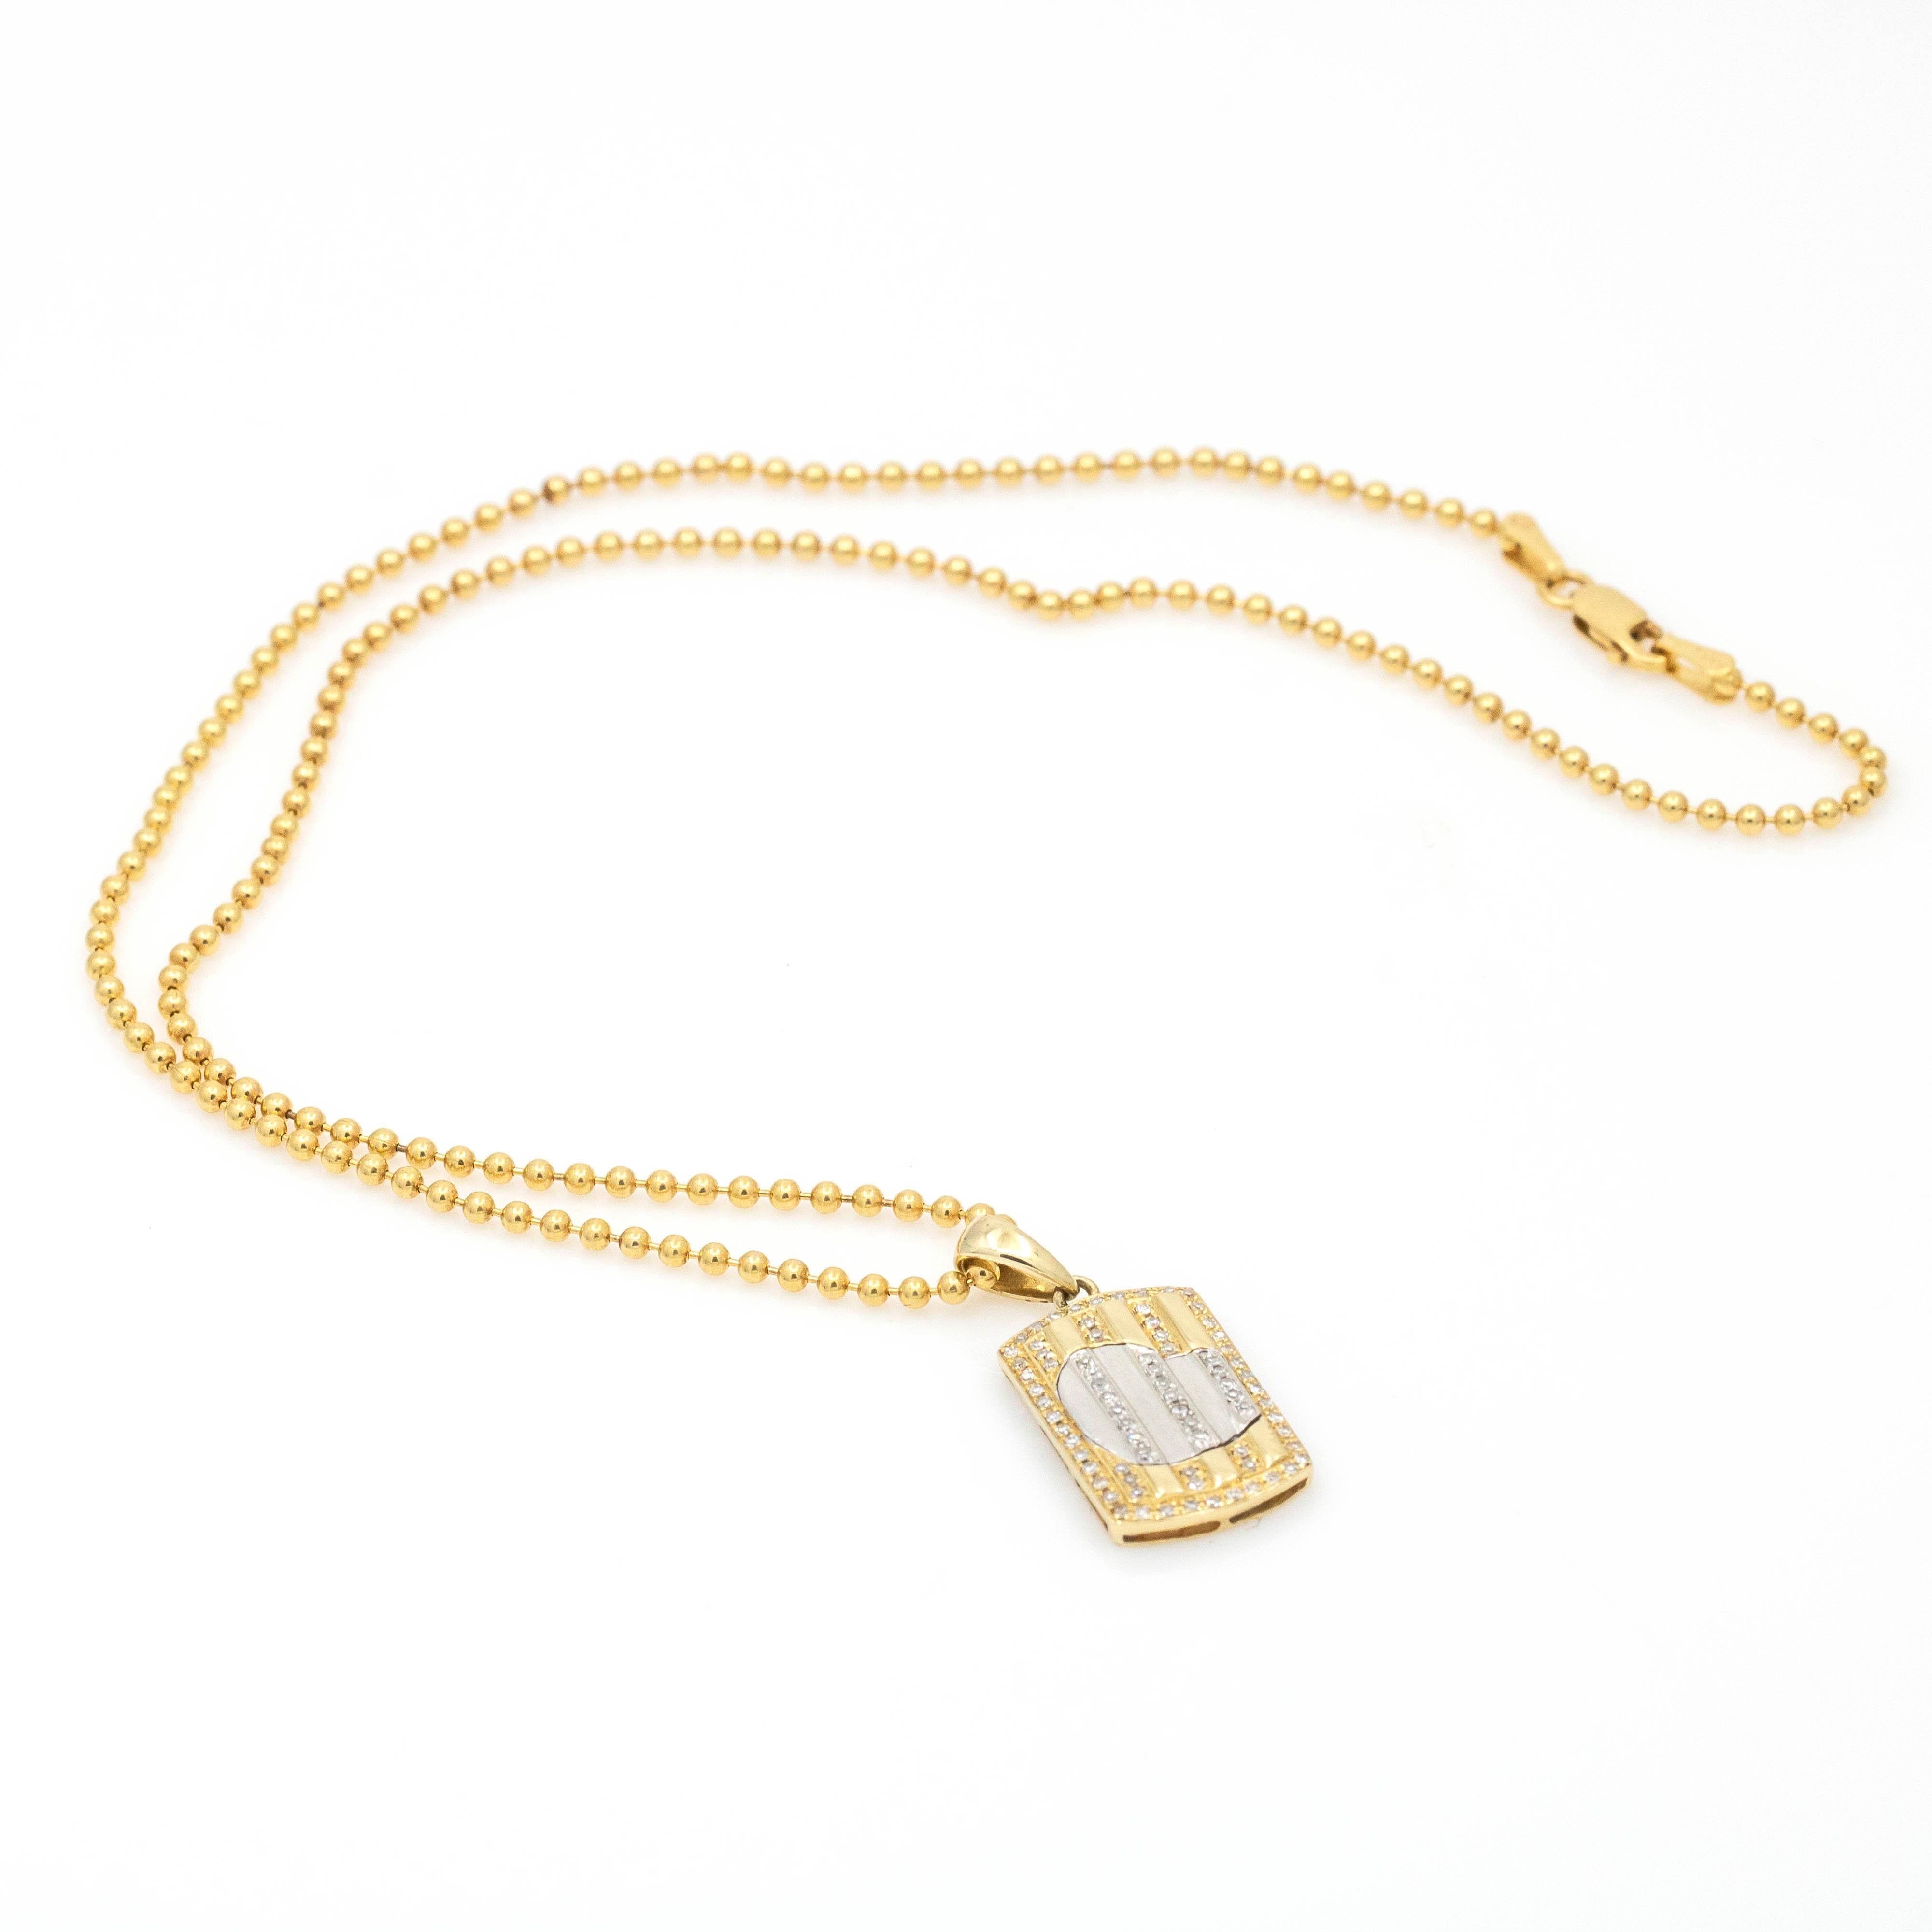 This Women's Diamond Heart Mini Dog Tag Pendant Necklace is a cute and feminine accessory perfect for layering. Crafted in 14k yellow gold with white gold heart detail and pave diamond accents, it's a unique twist on the classic dog tag design. The